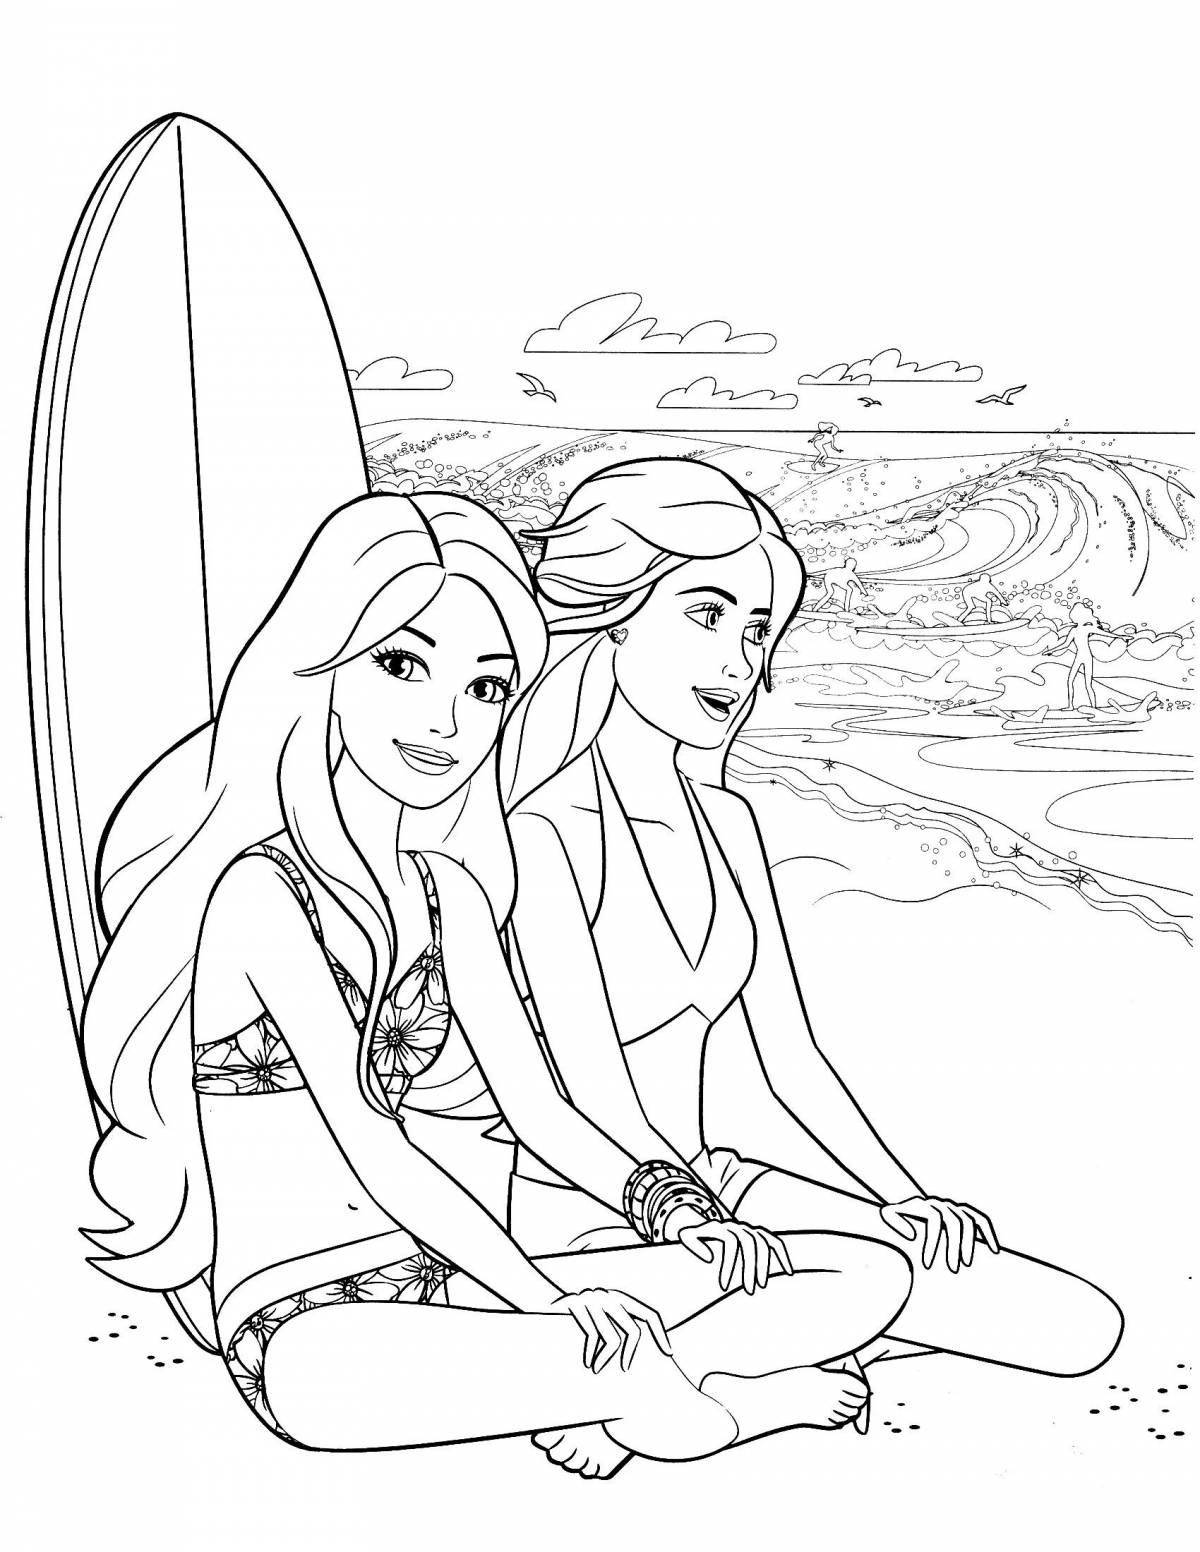 Cute barbie coloring page on the beach